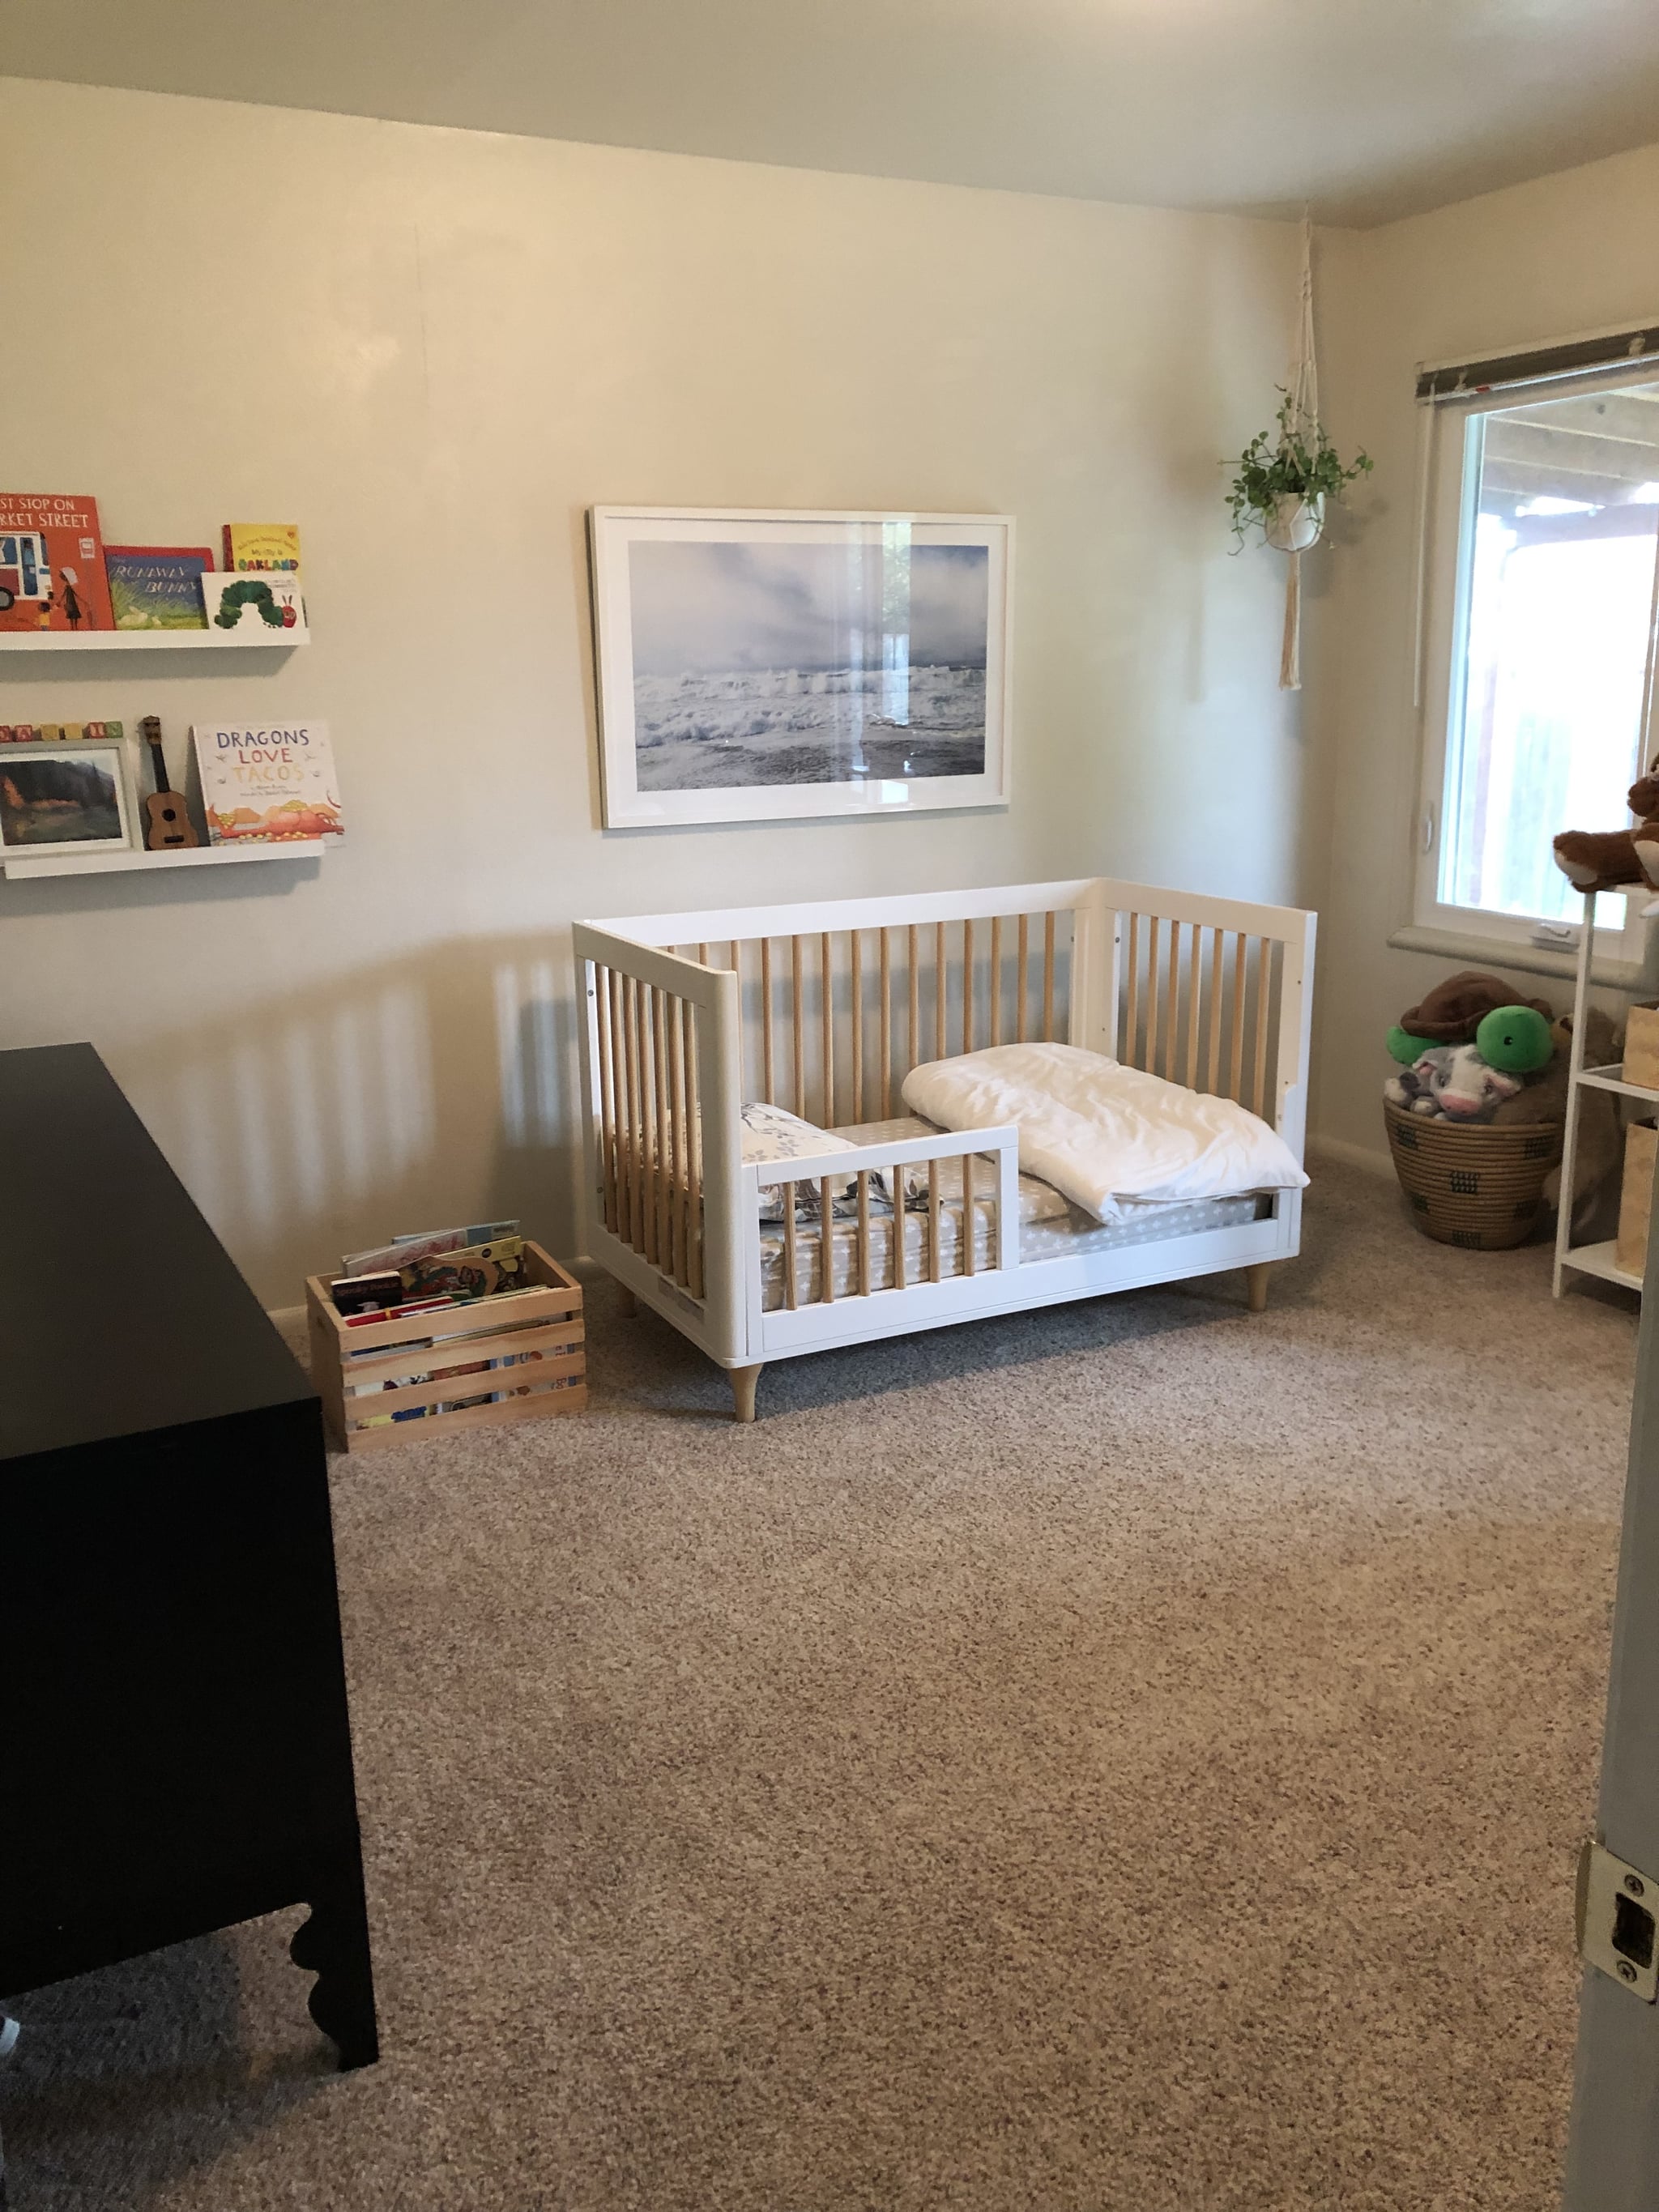 Bedroom Ideas For Toddler And Baby Design Corral